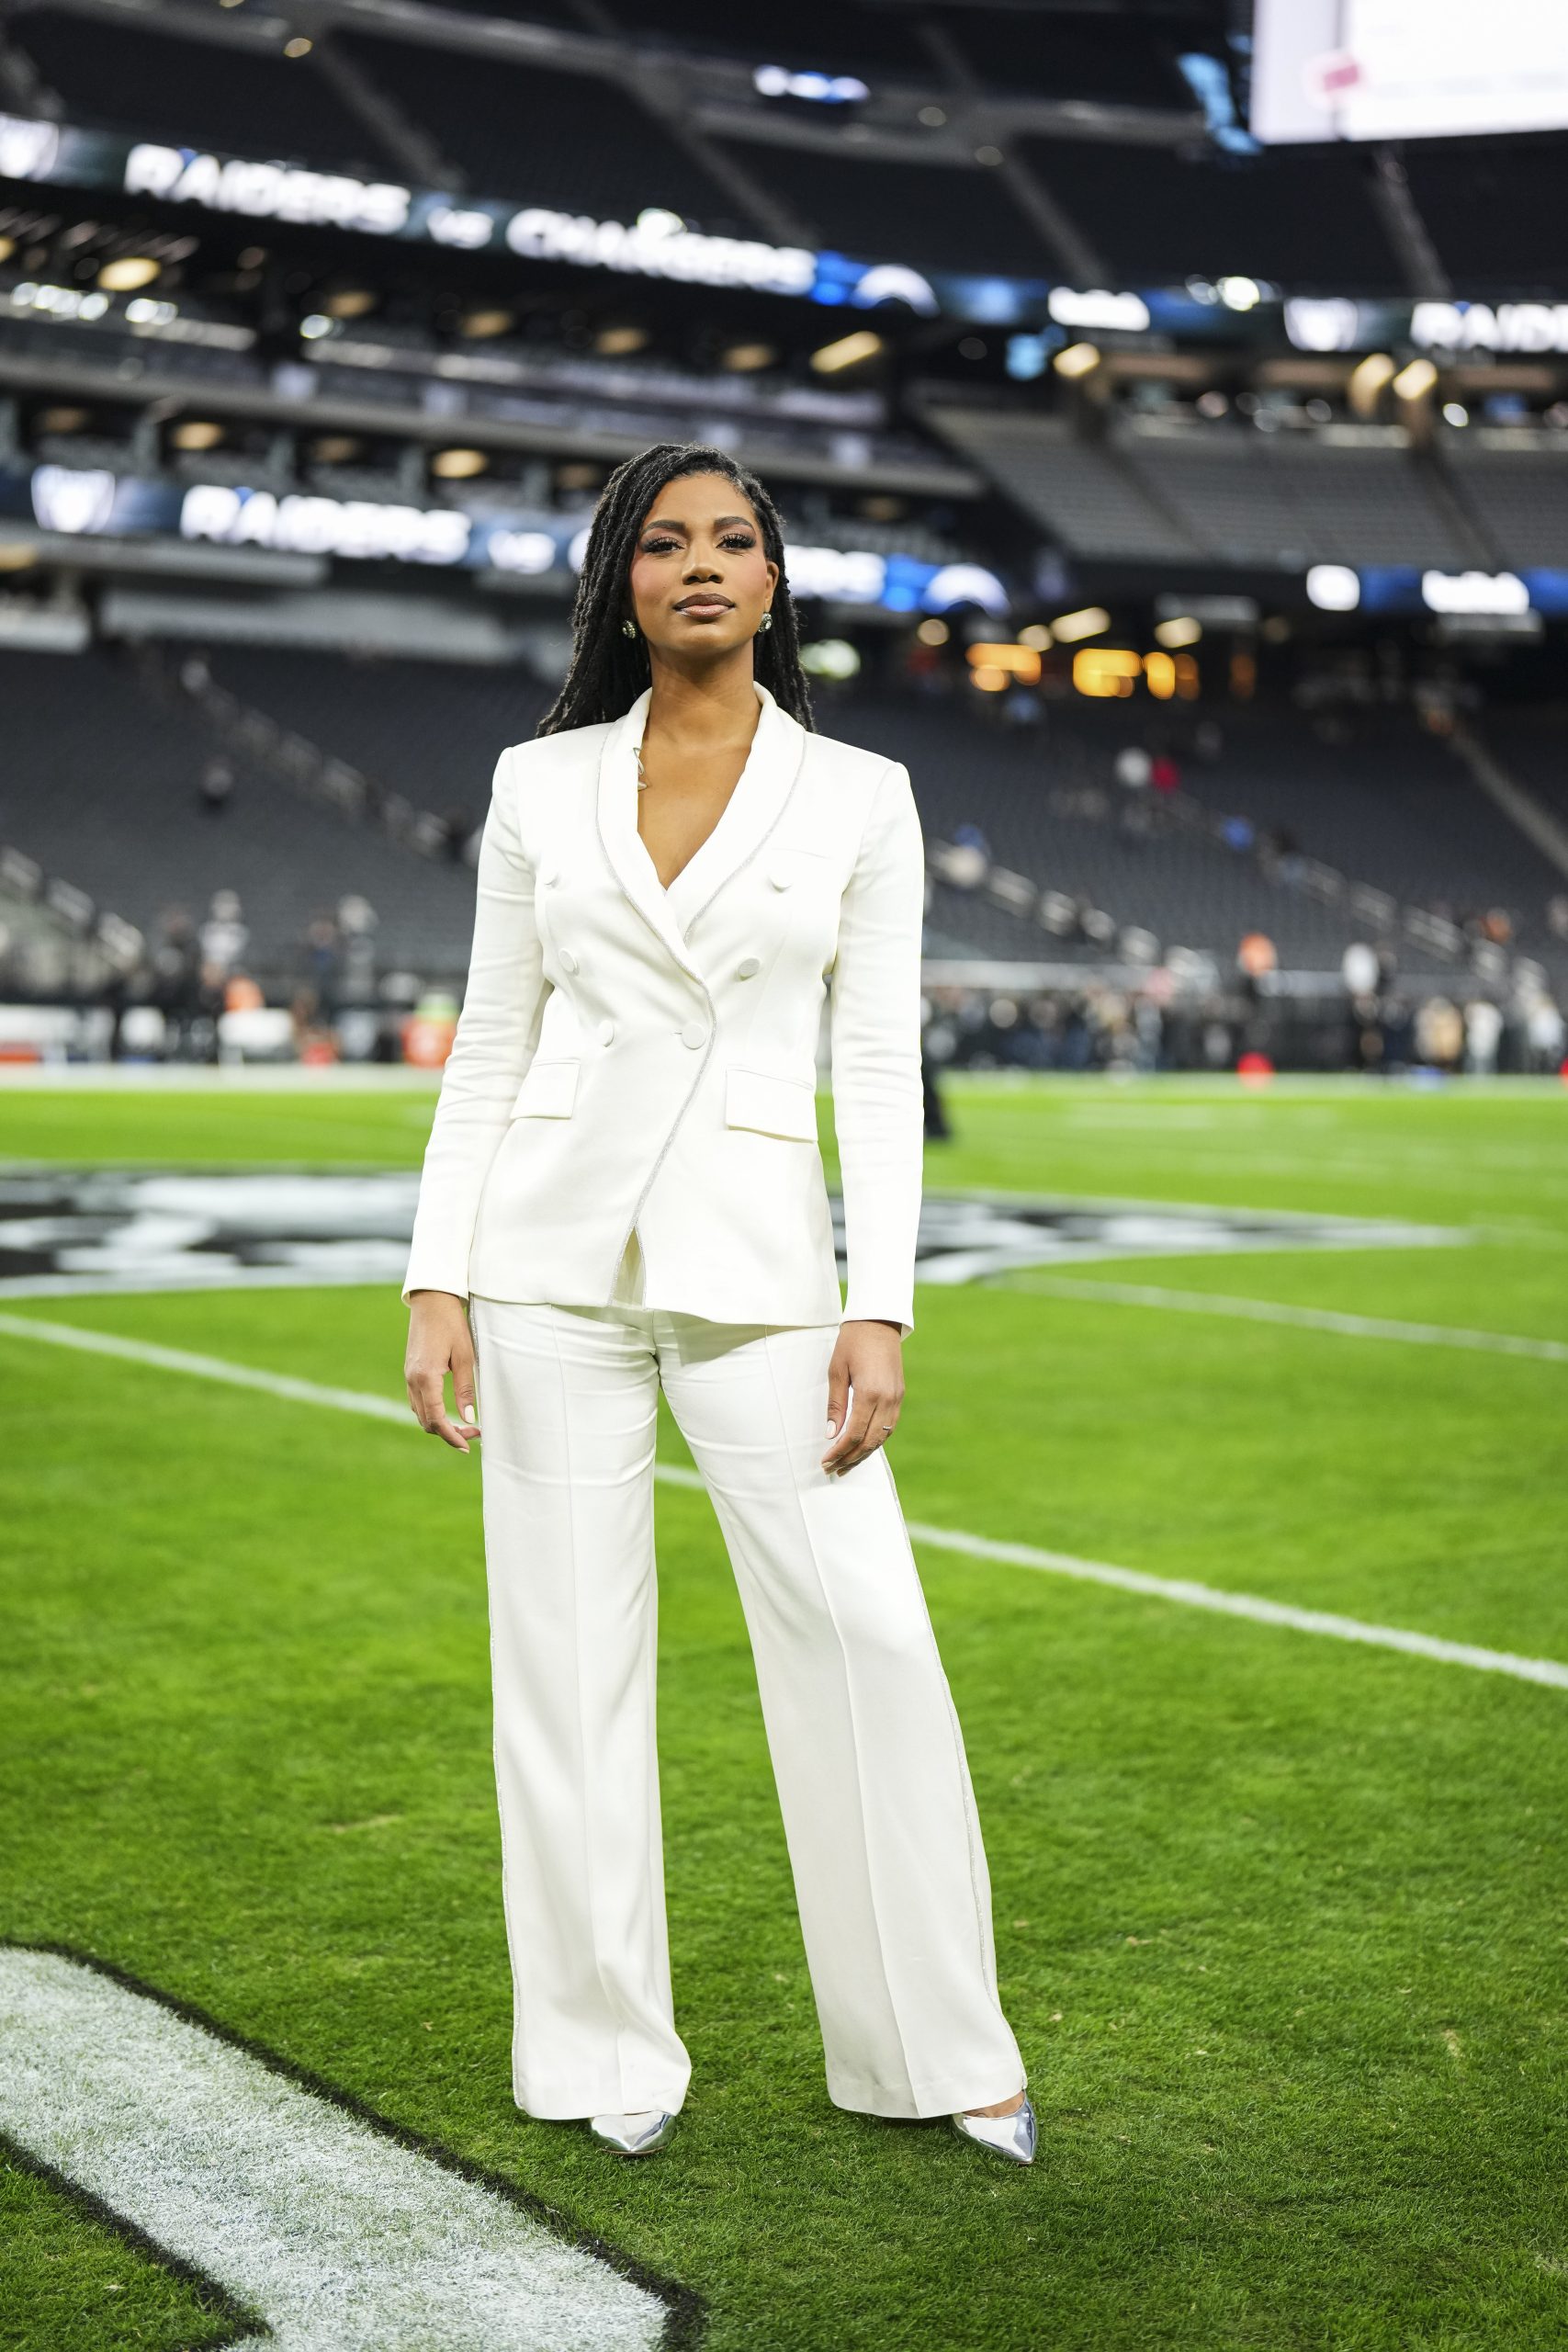 How Taylor Rooks Perfected the Art of Interviewing and Created Her Own Lane in Sports